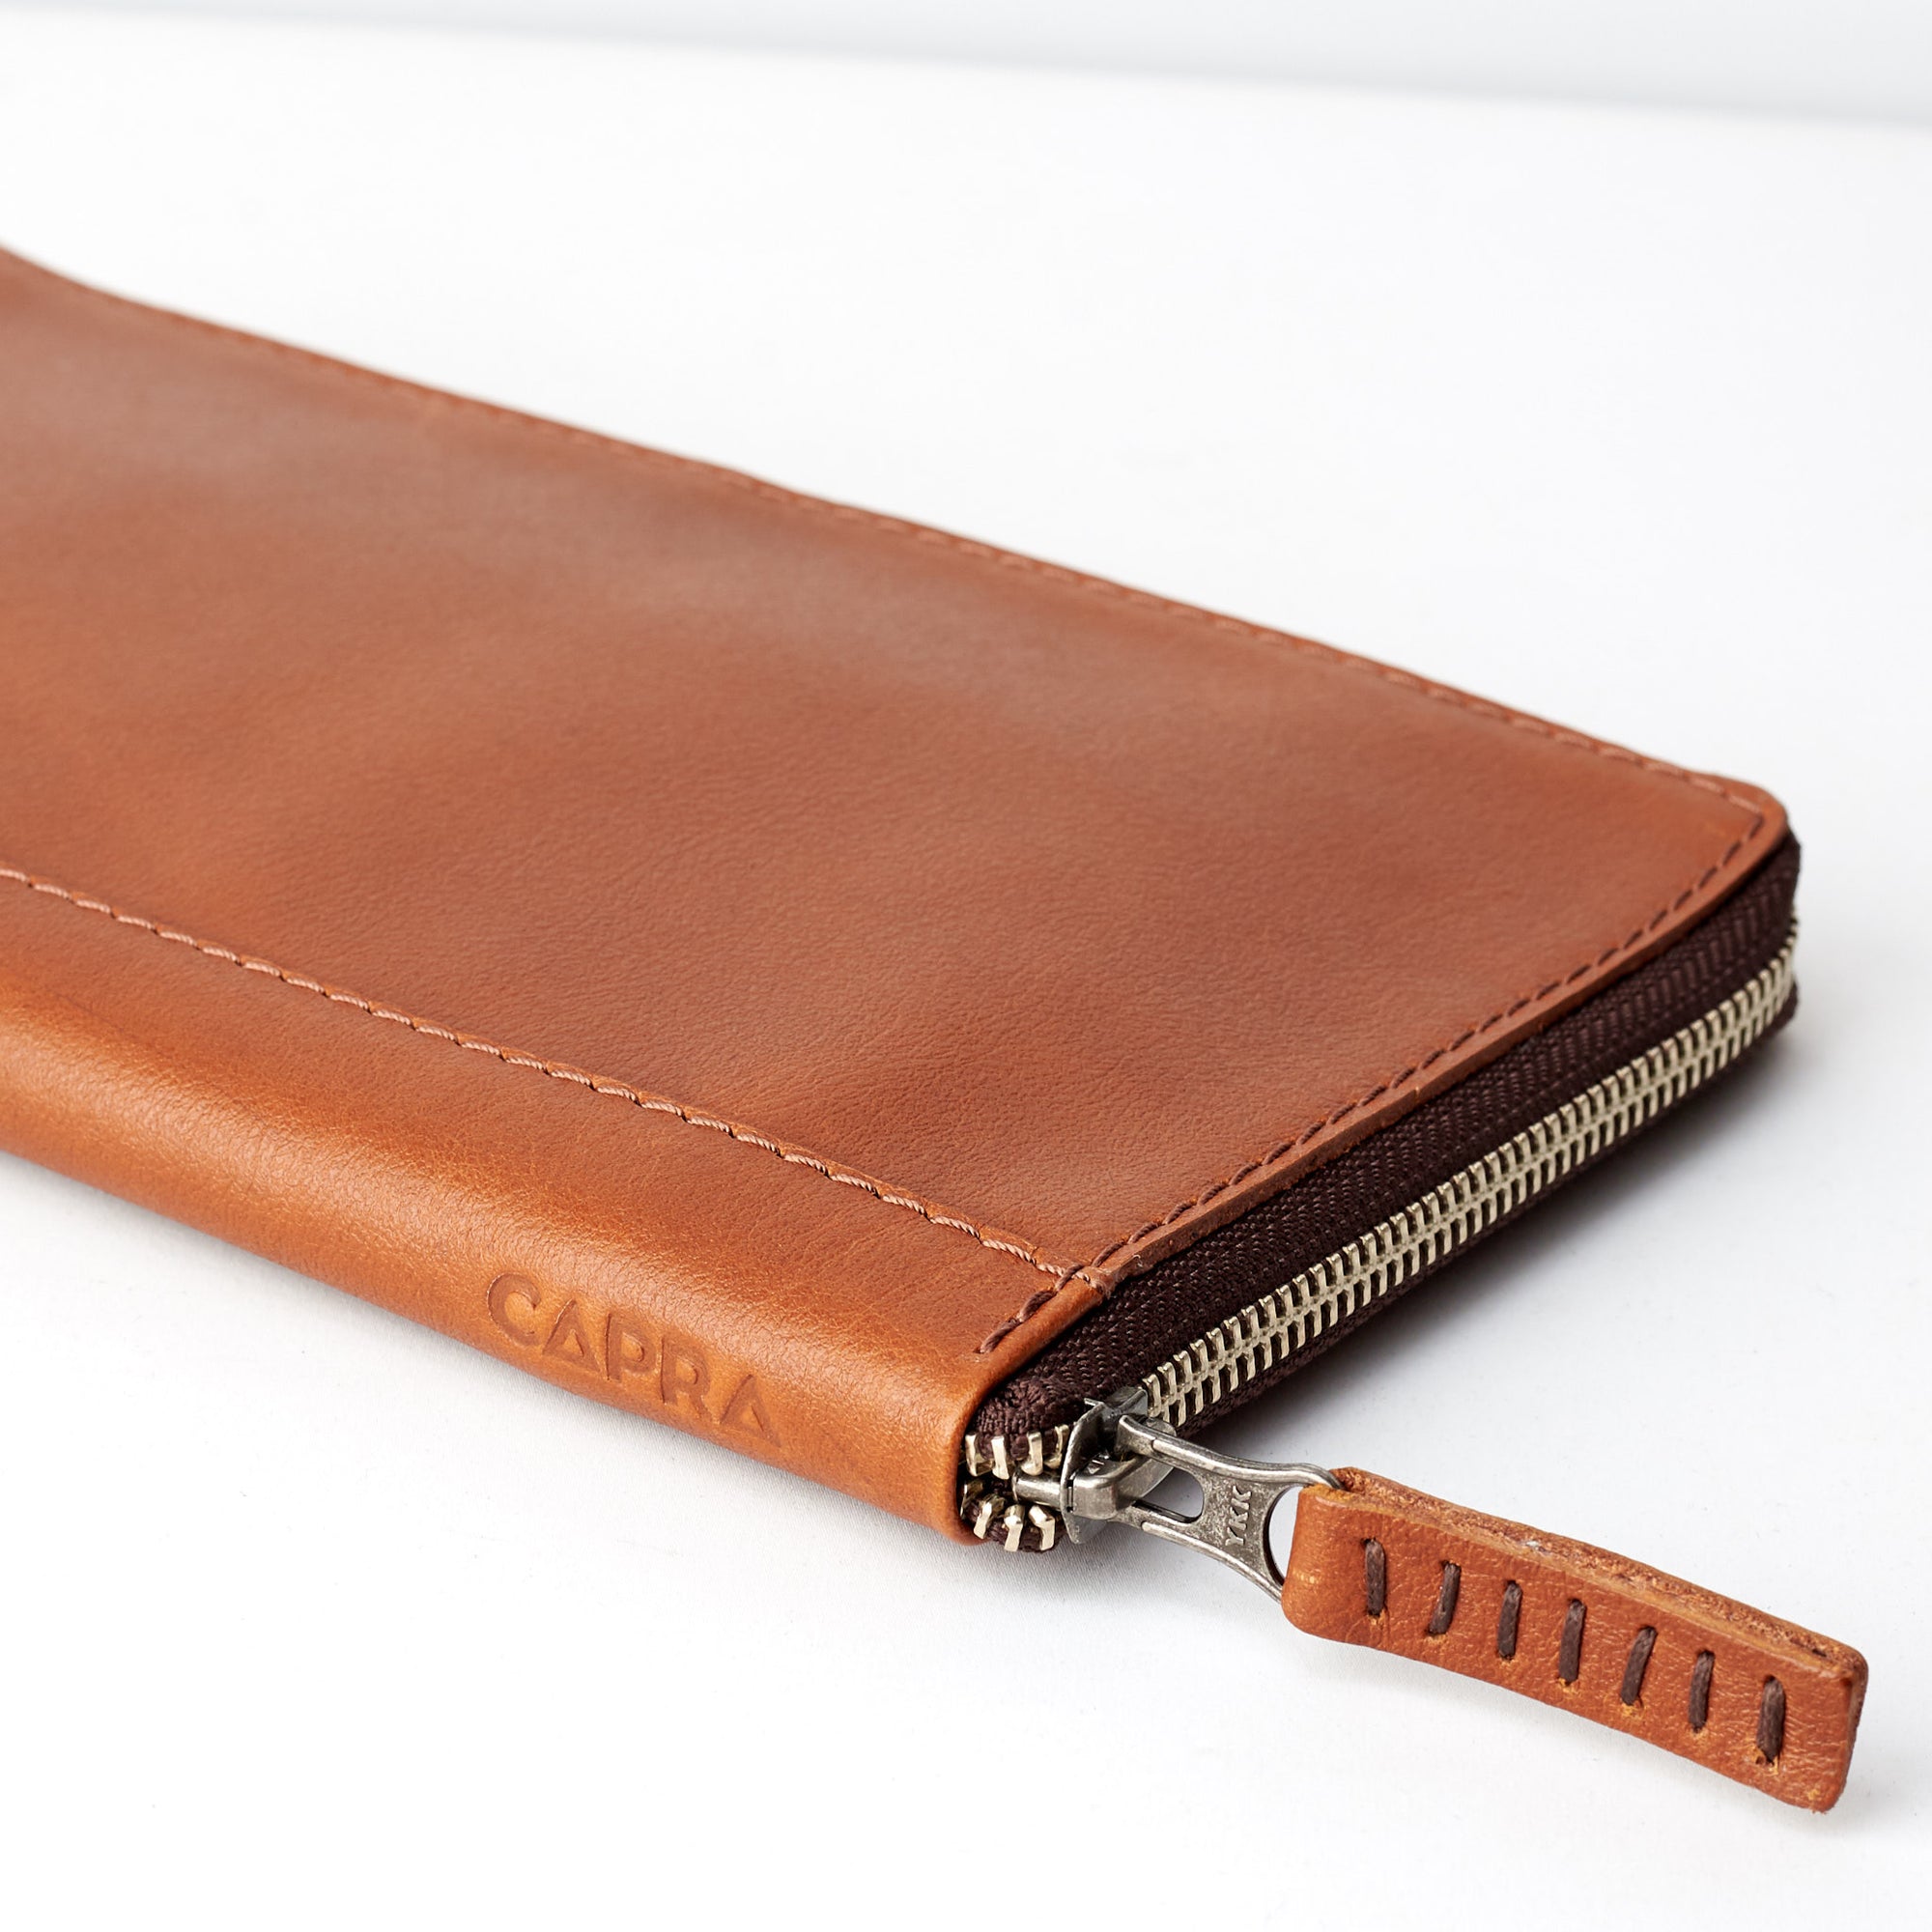 Slider and side view. Tan leather passport holder. Airport travel leather organizer accessories. Leather good craft by Capra Leather.